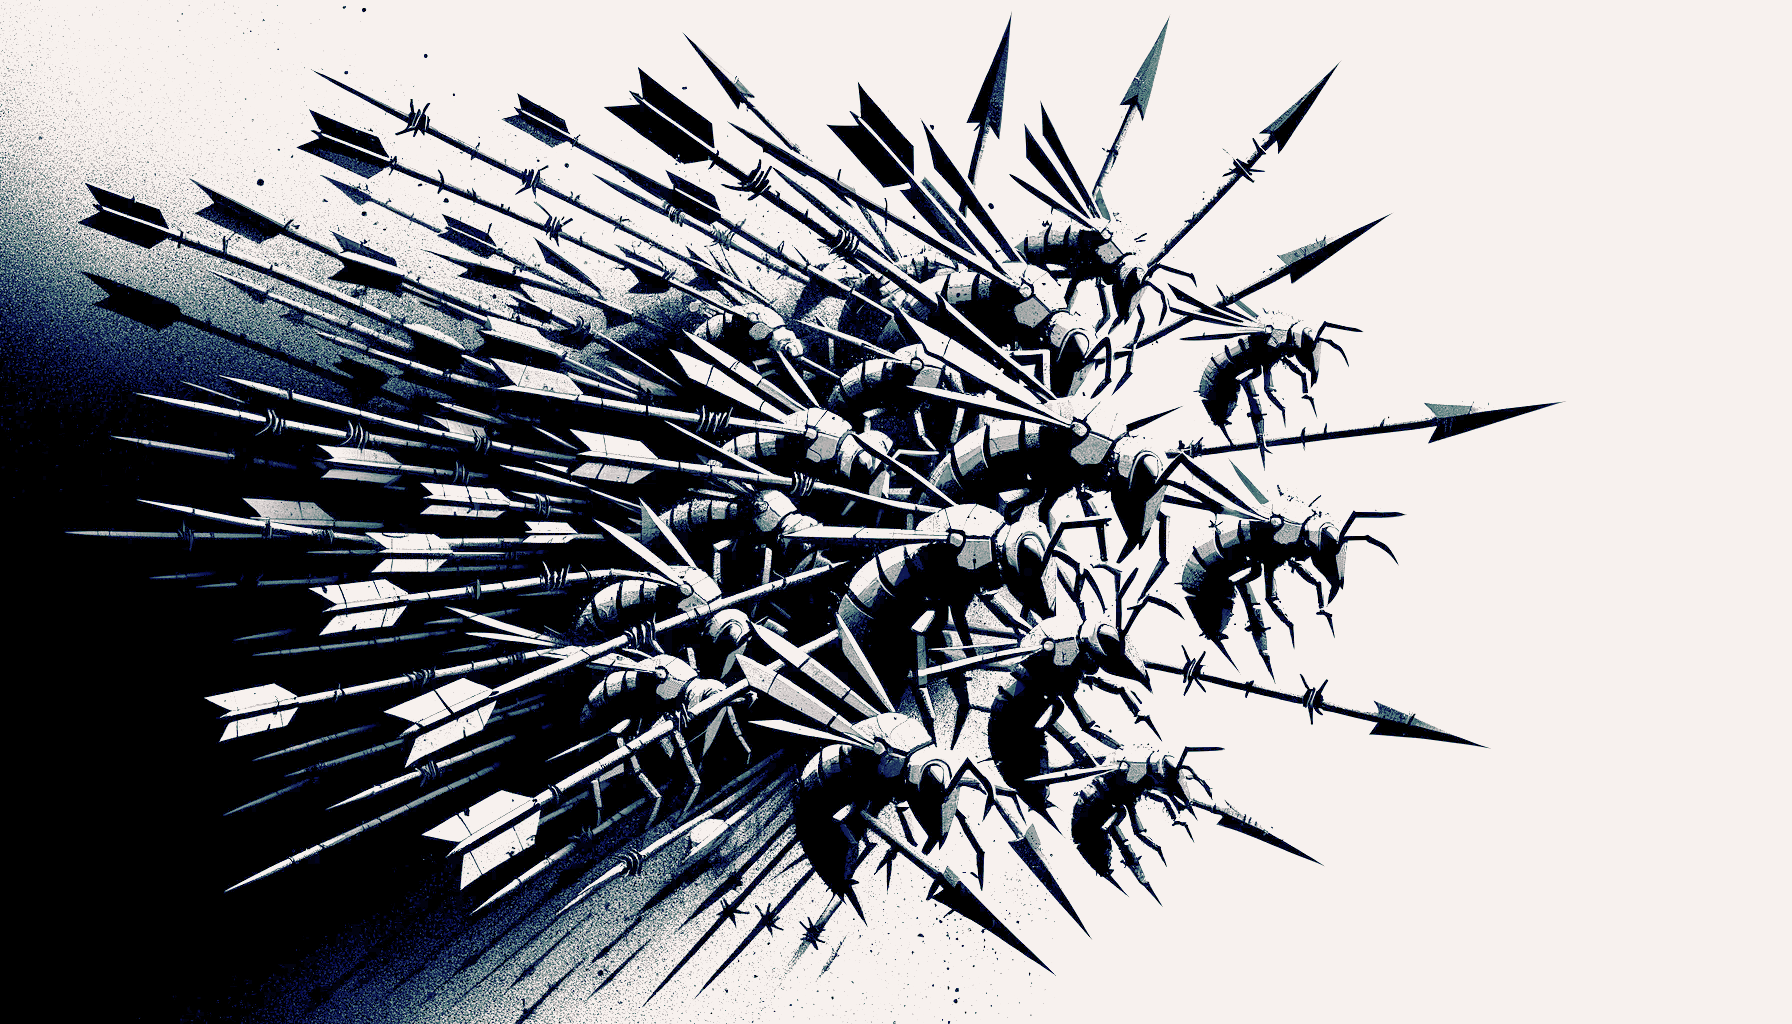 A swarm of mechanical insects moving to the right. Moving along with the insects are arrows with shafts made of barbed wires. It invokes the feeling of swarm warfare. High contrast, monochromatic, minimalistic, in the style of vector svg art.